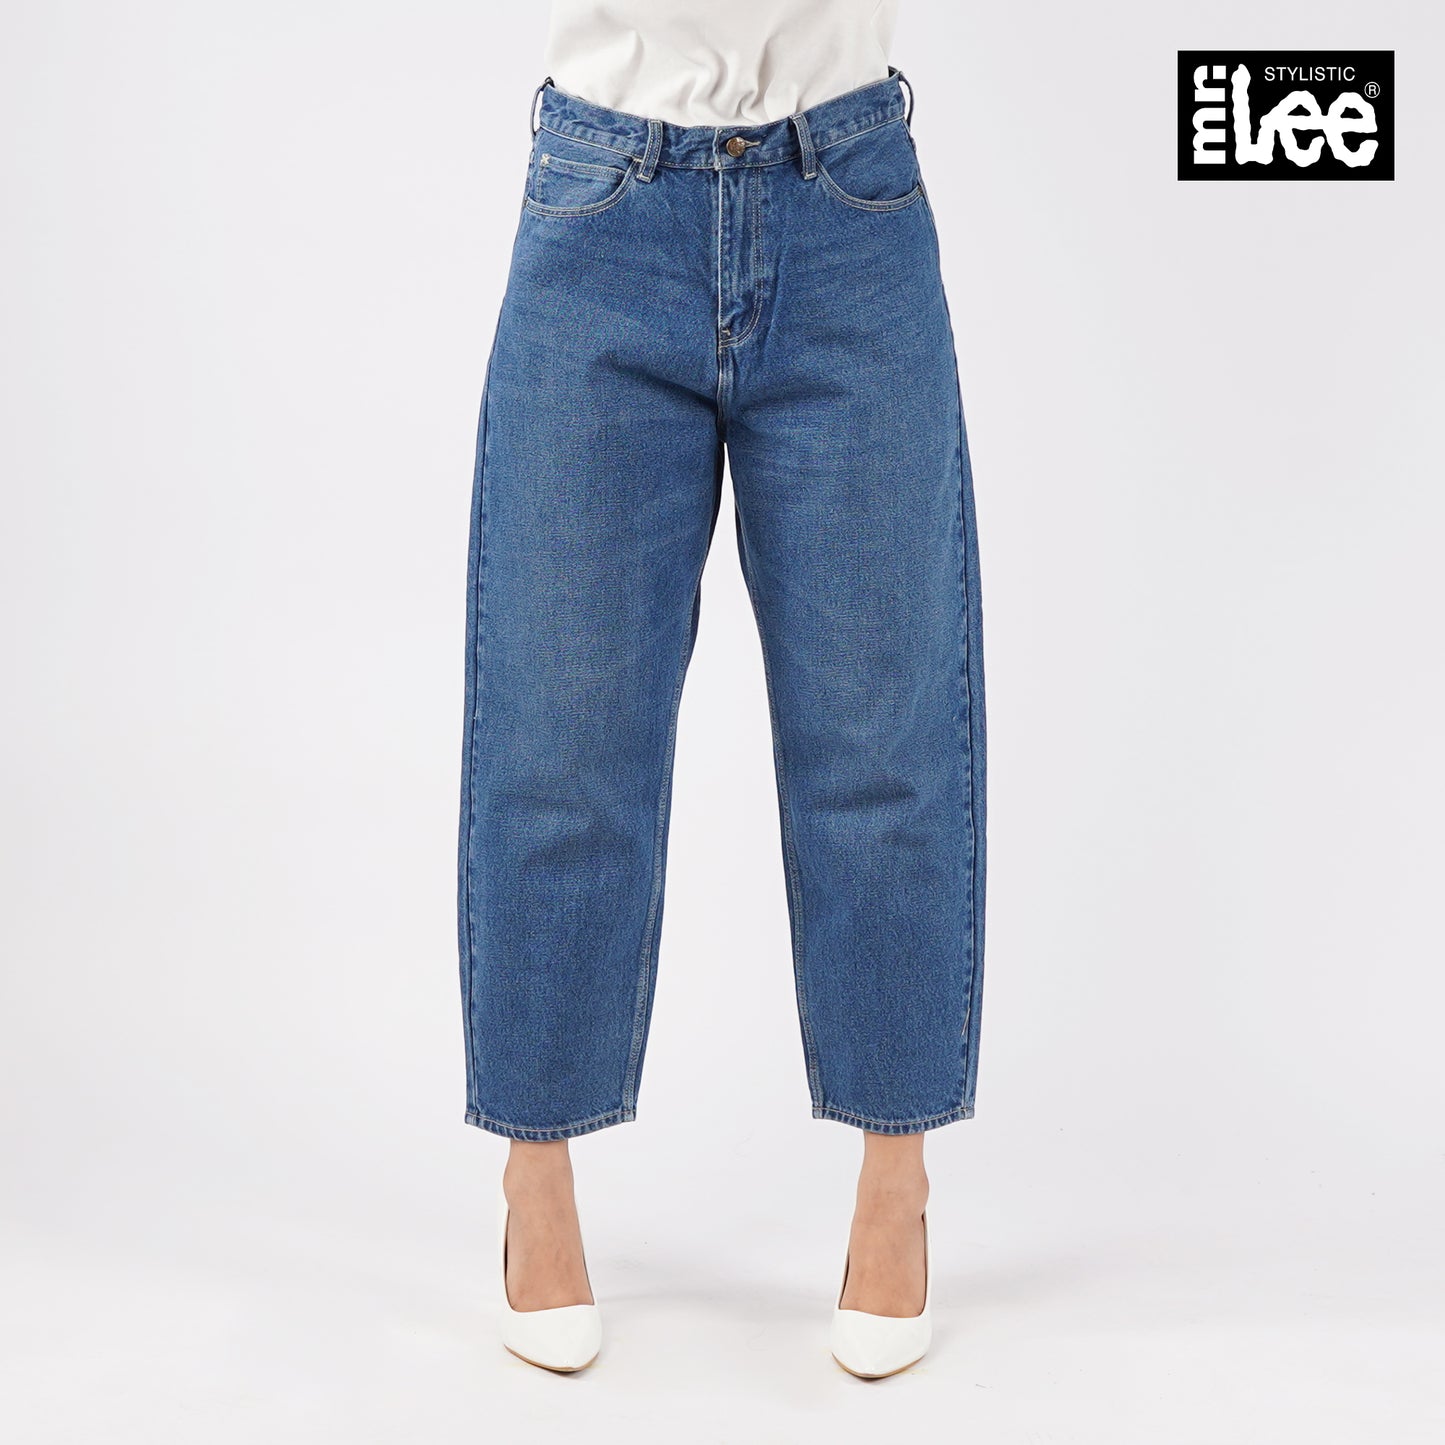 Stylistic Mr. Lee Ladies Basic Denim Mom Jeans Balloon Fitting for Women Trendy Fashion High Quality Apparel Comfortable Casual Pants for Women 149918 (Medium Shade)